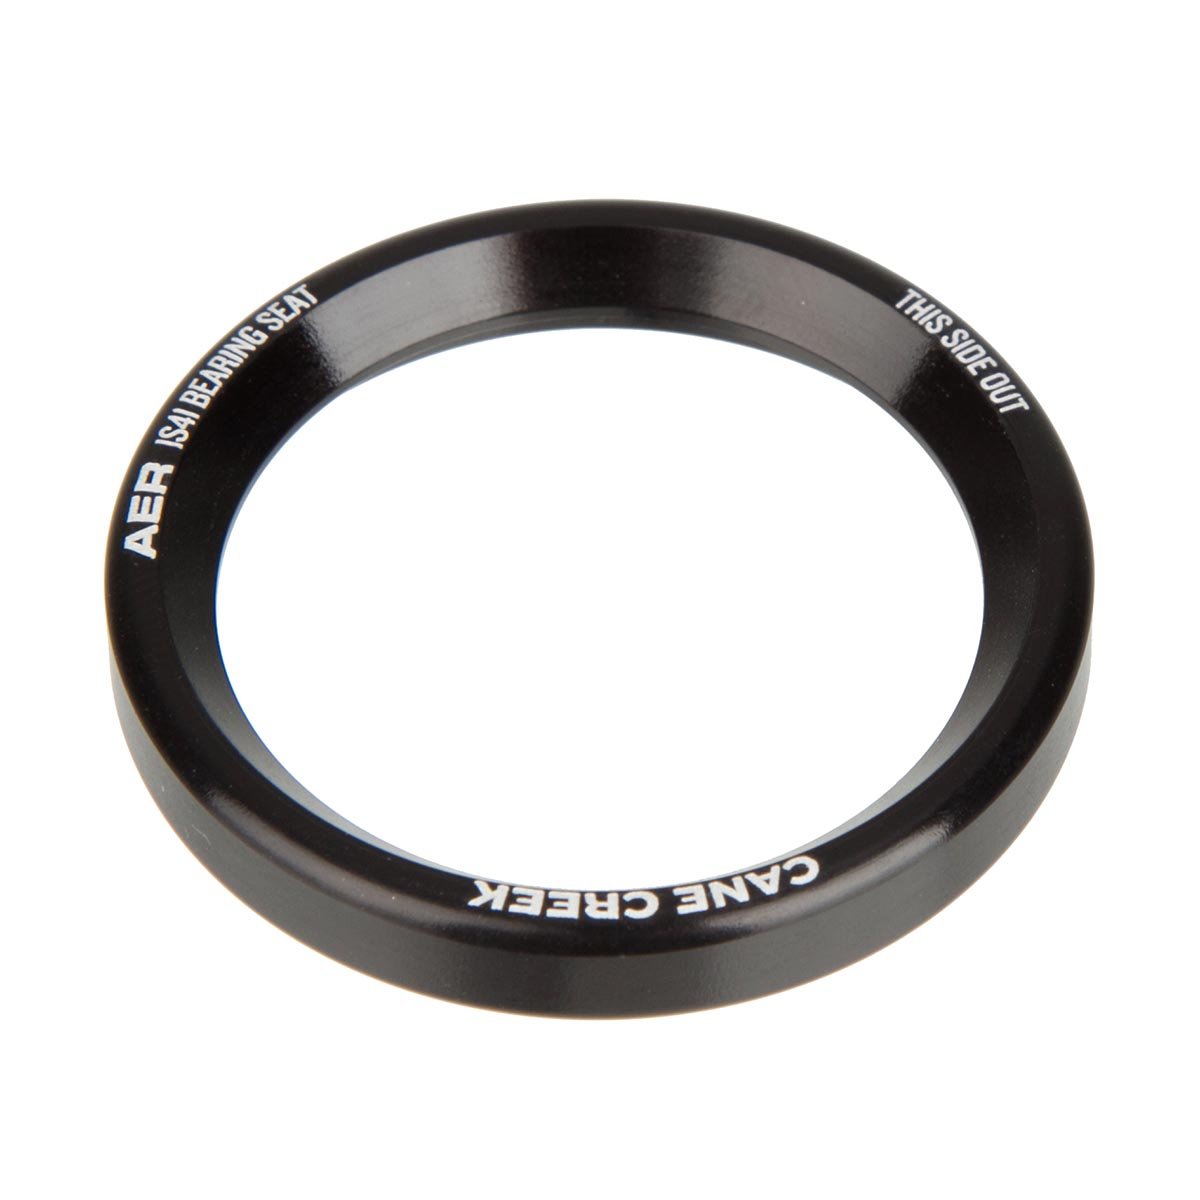 Cane Creek Headset Bearing Seat AER For Norglide, 41-42 mm,, one piece